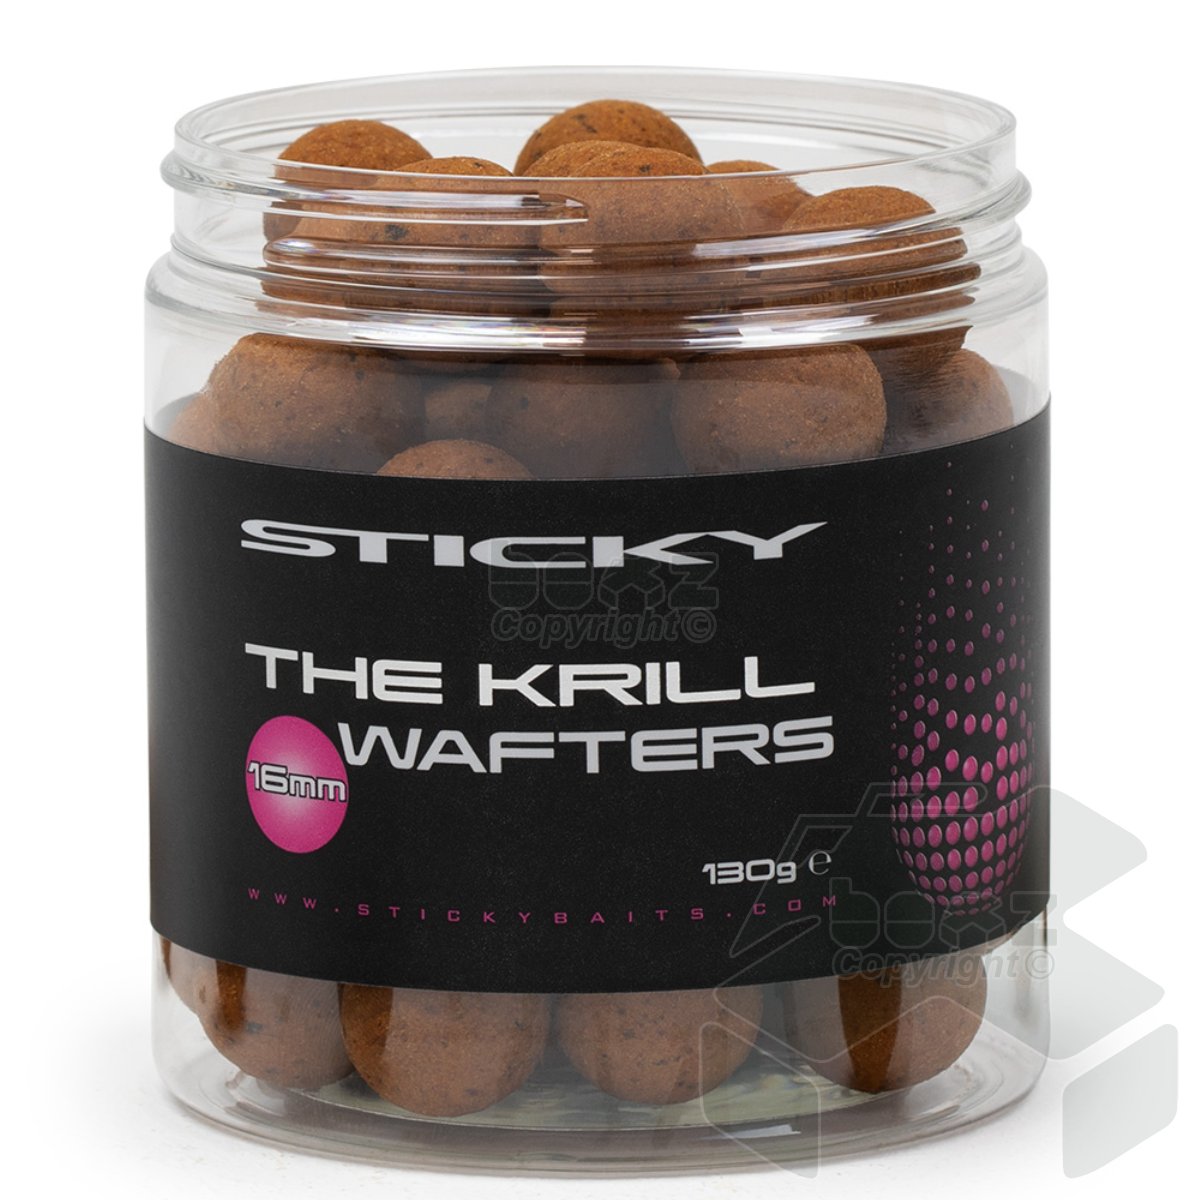 Sticky The Krill Wafters 16mm 130g Pot